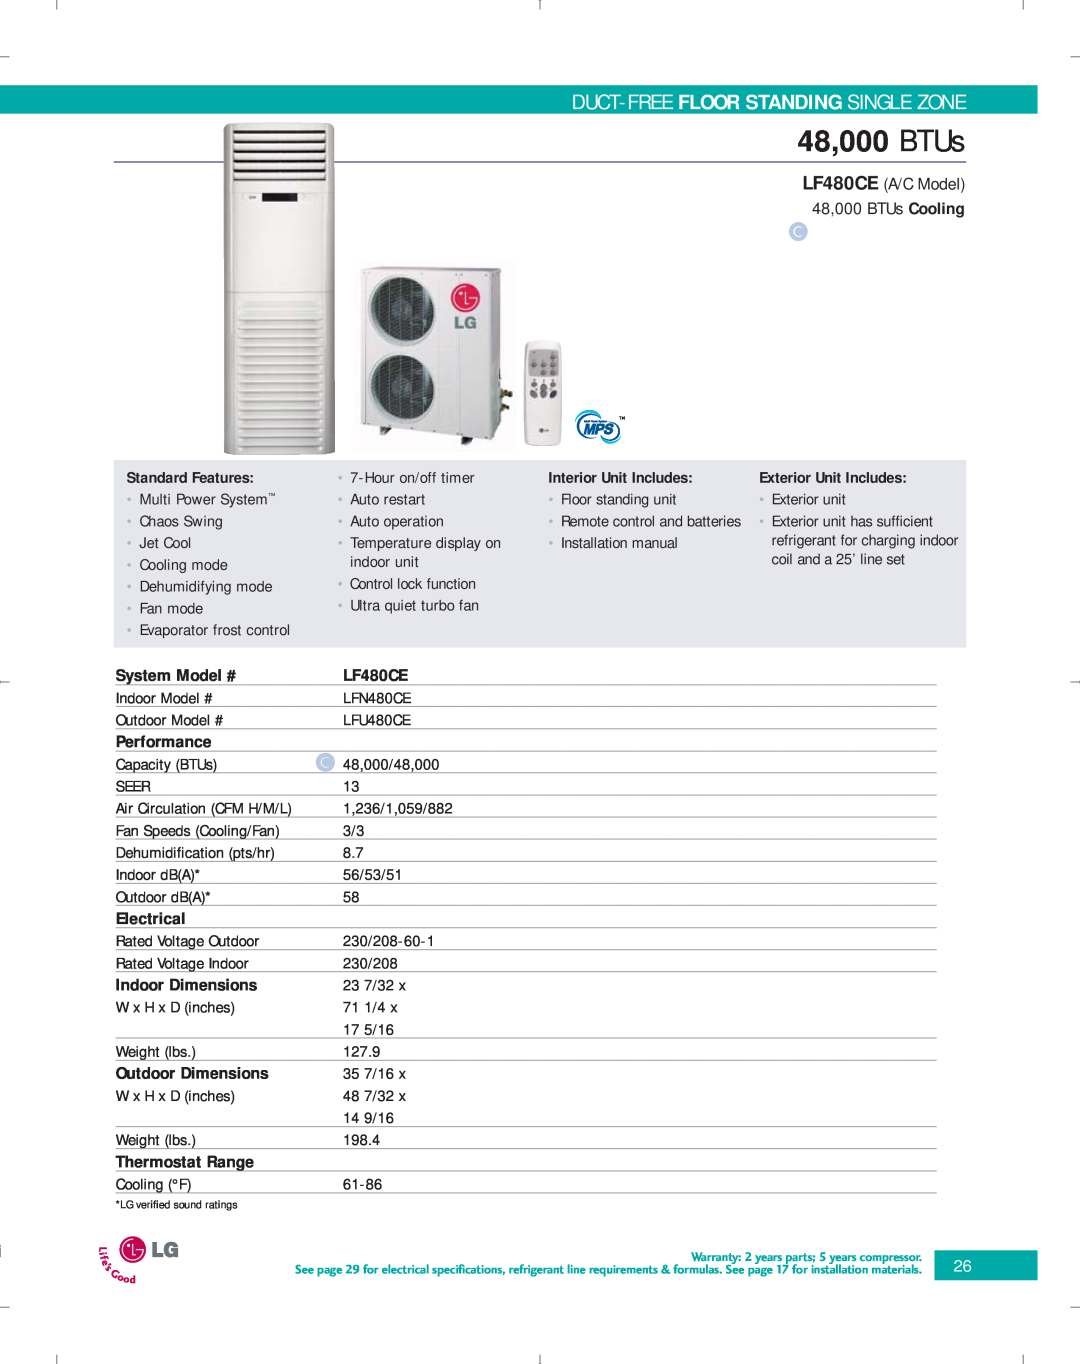 LG Electronics PG-100-2006-VER3 48,000 BTUs, LF480CE, Duct-Free Floor Standing Single Zone, System Model #, Performance 